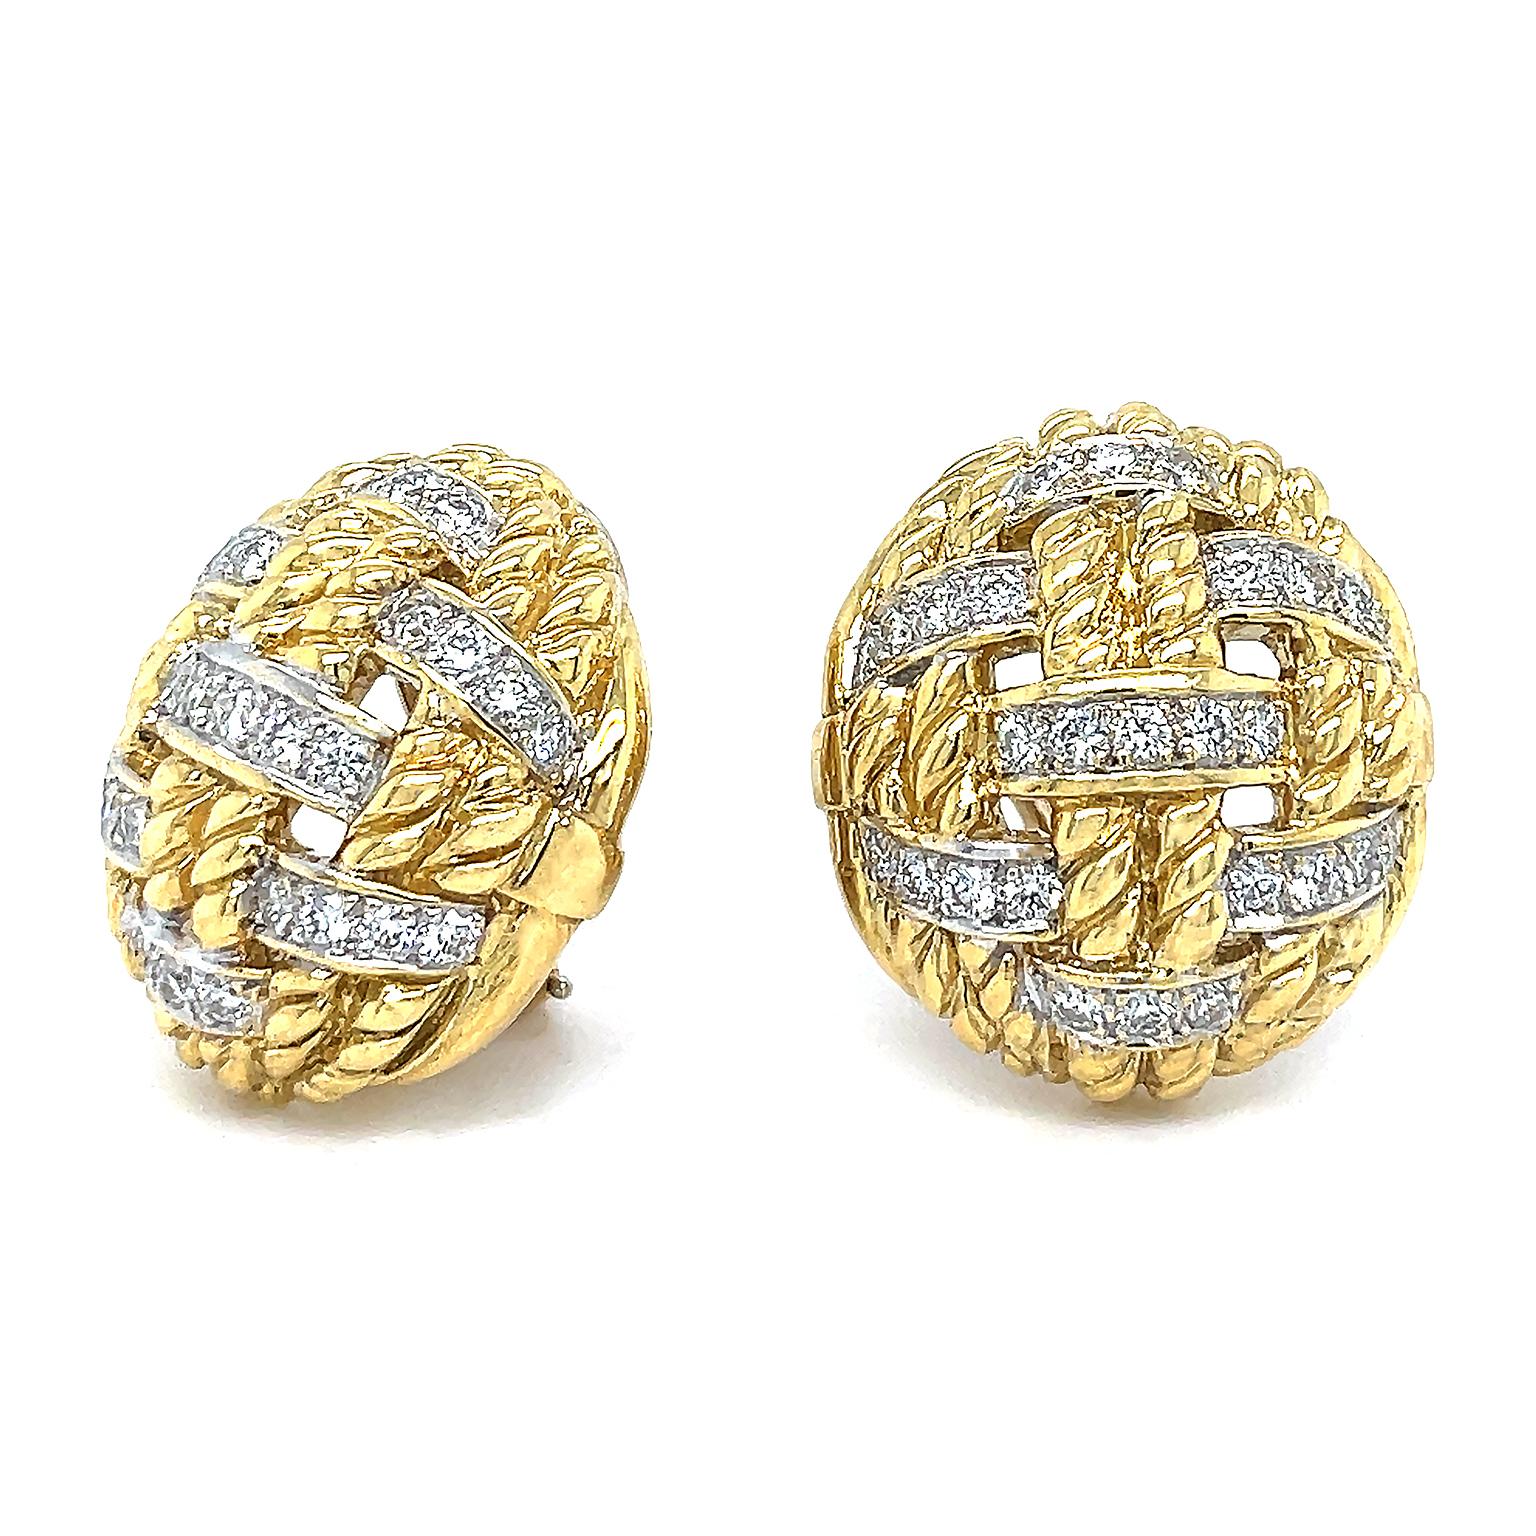 The glow of 18k yellow gold features the brilliance of diamonds in these unique earrings. Embellished with brilliant cut diamonds, the precious metal is carved as a rope woven into a dome. The total weight of the 54 diamonds is 1.61 carats. 18k